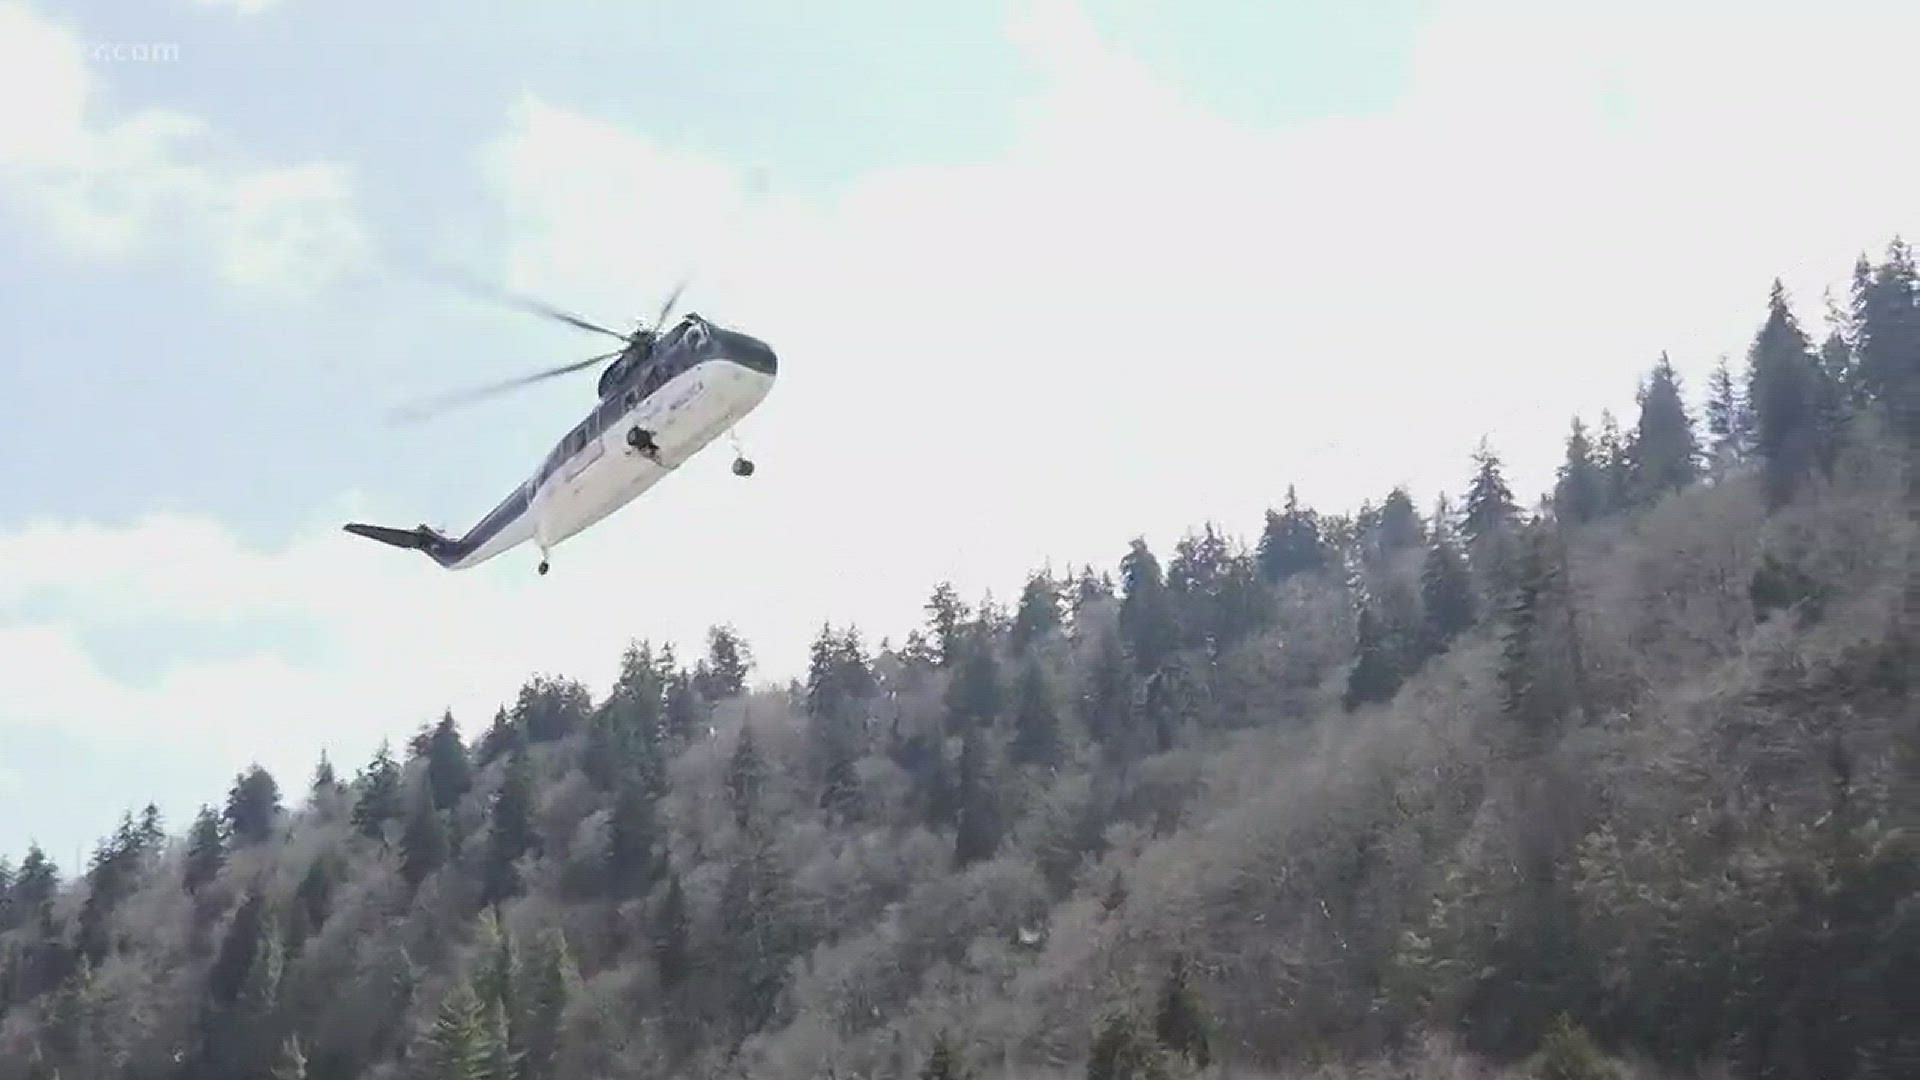 March 13, 2018: Helicopters are ferrying supplies to LeConte Lodge in the Great Smoky Mountains National Park so the lodge caretakers can stock up for the 2018 season.